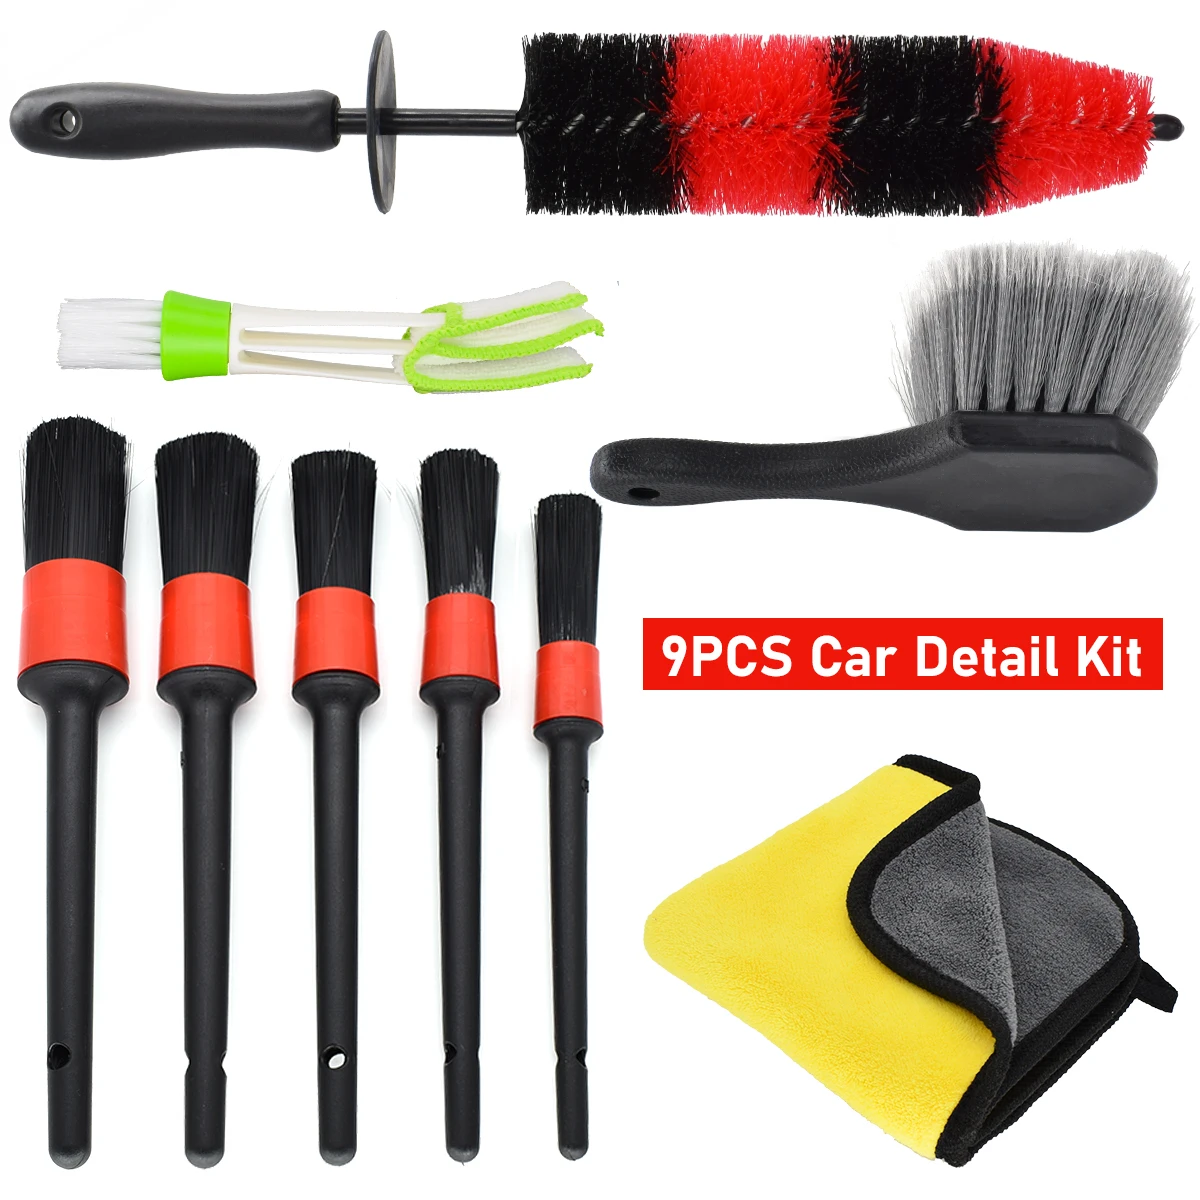 

9Pcs Wheel Tire Brush Car Cleaning Kit Easy Reach Engine Tyre Rim Detailing Brushes Microfiber Cleaning Drying Wash Cloth Towel